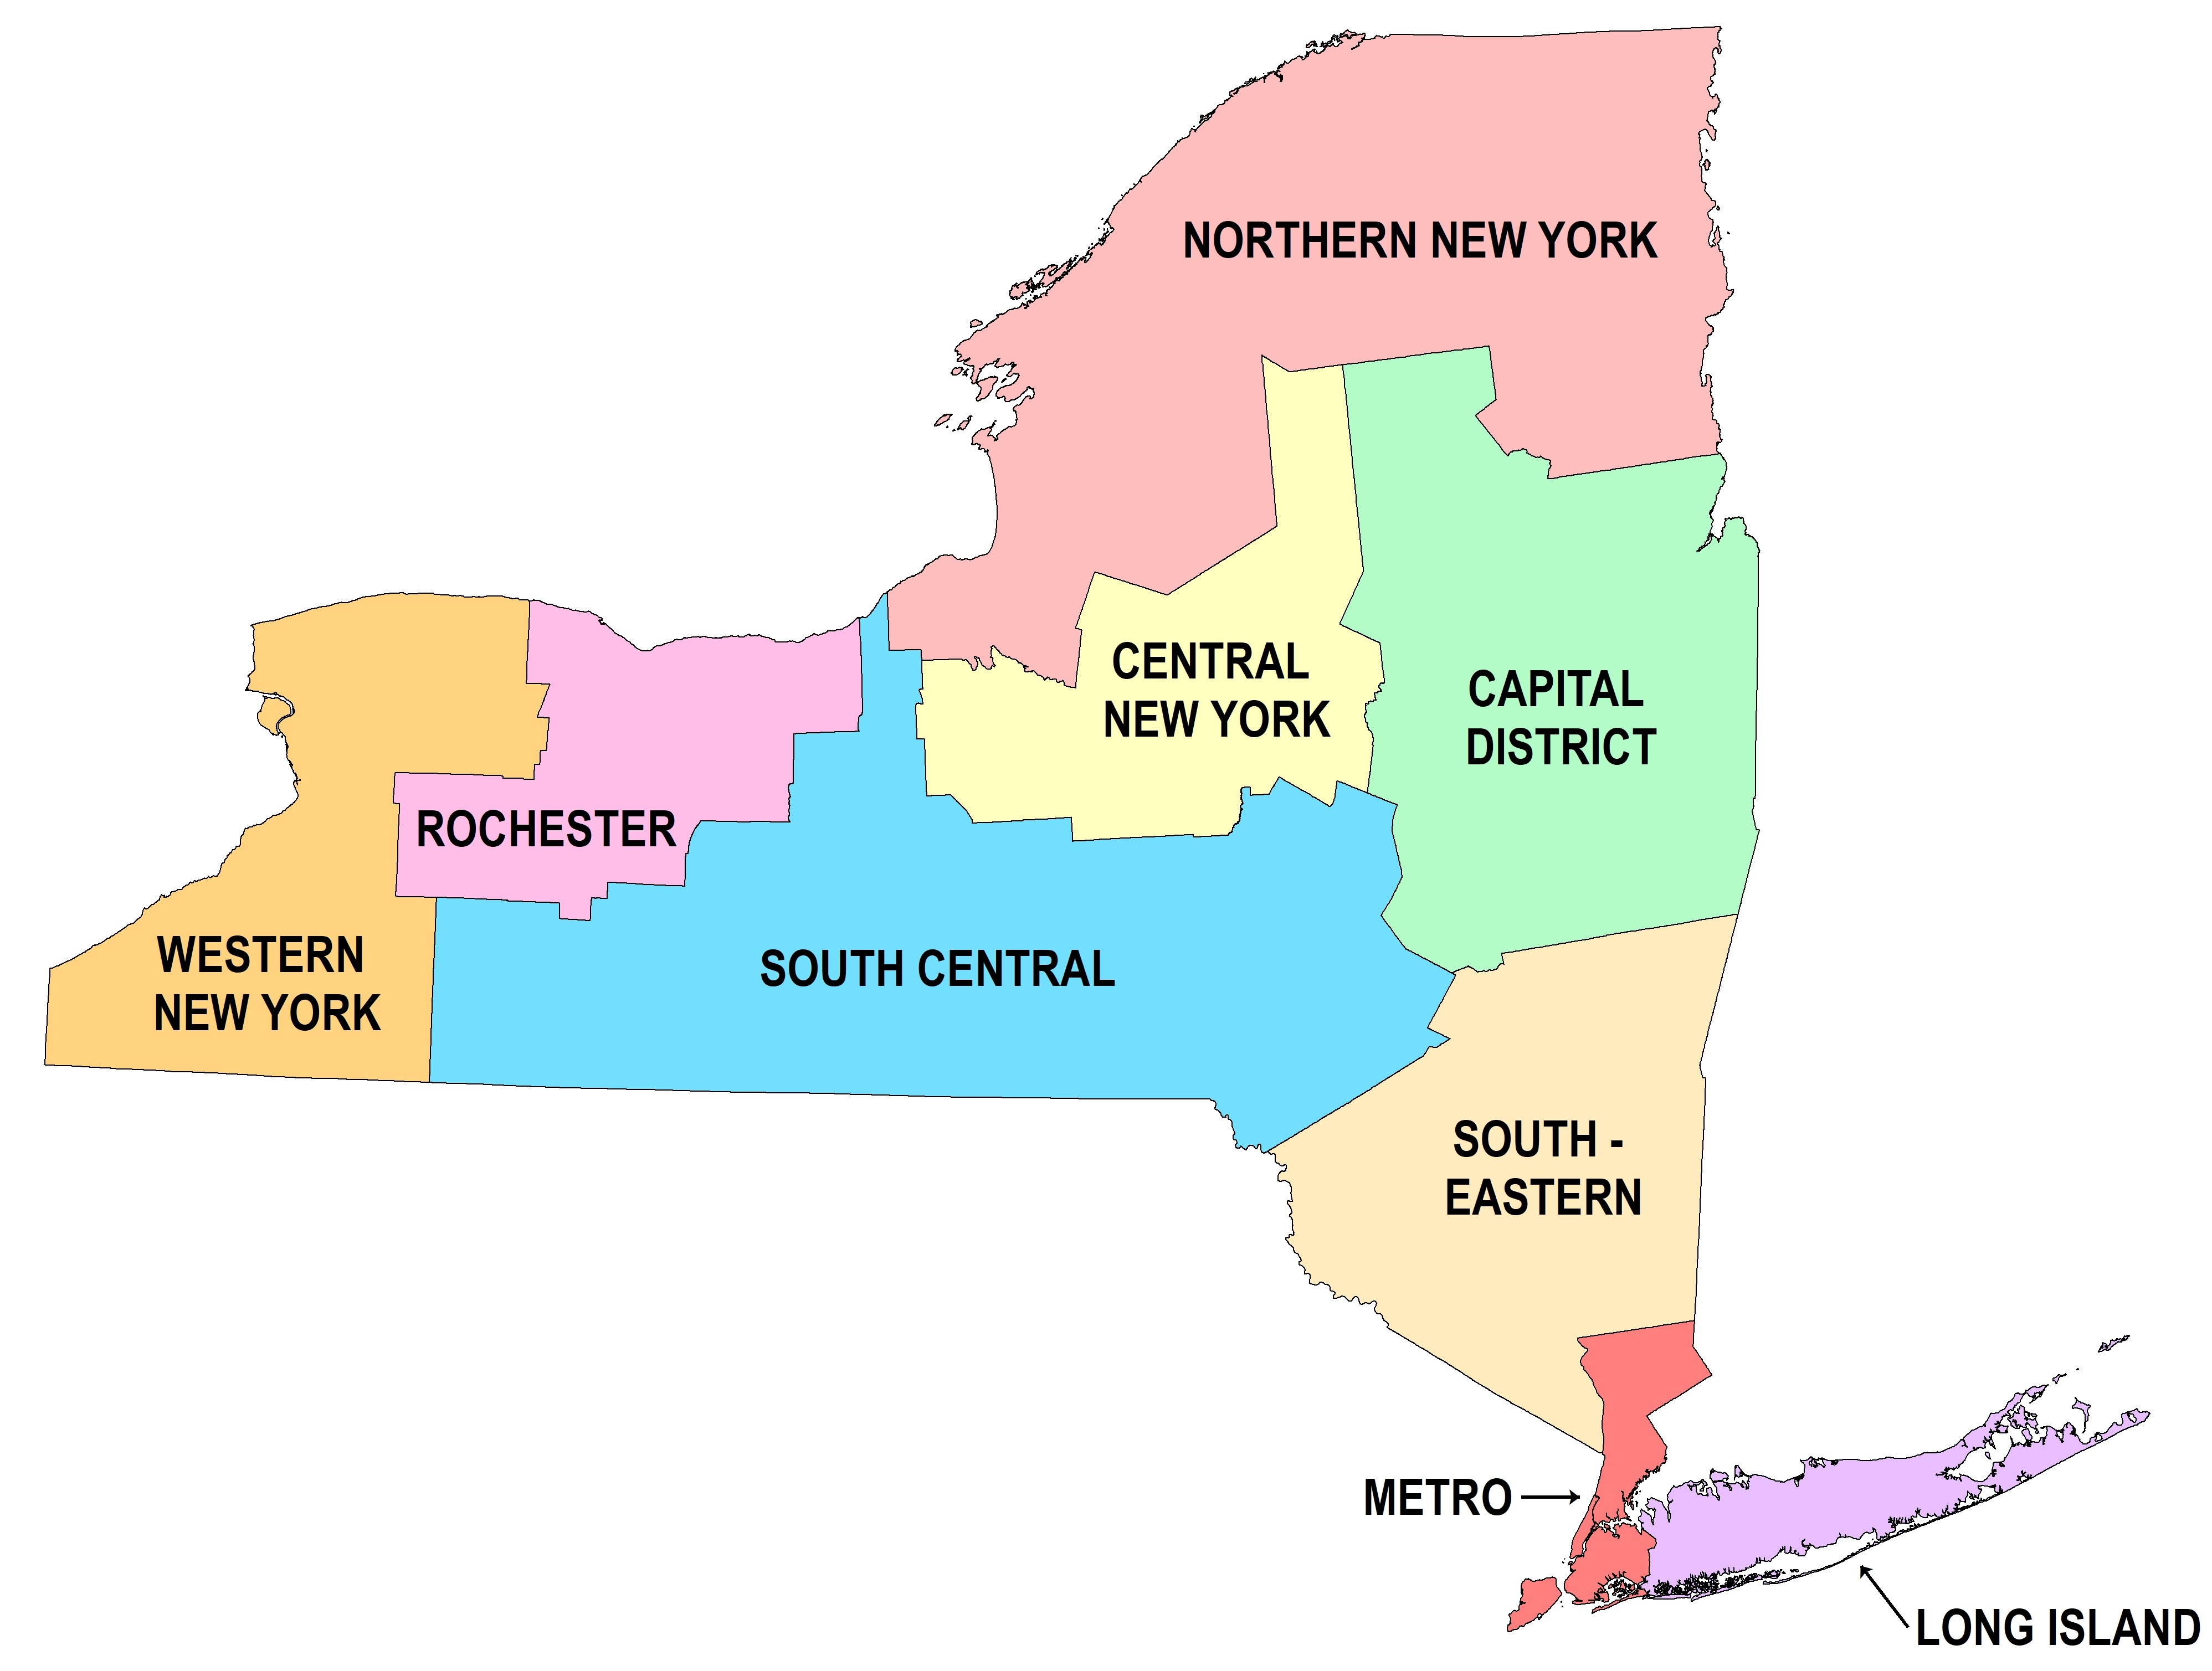 New York State's Reference and Research Library Resources Councils